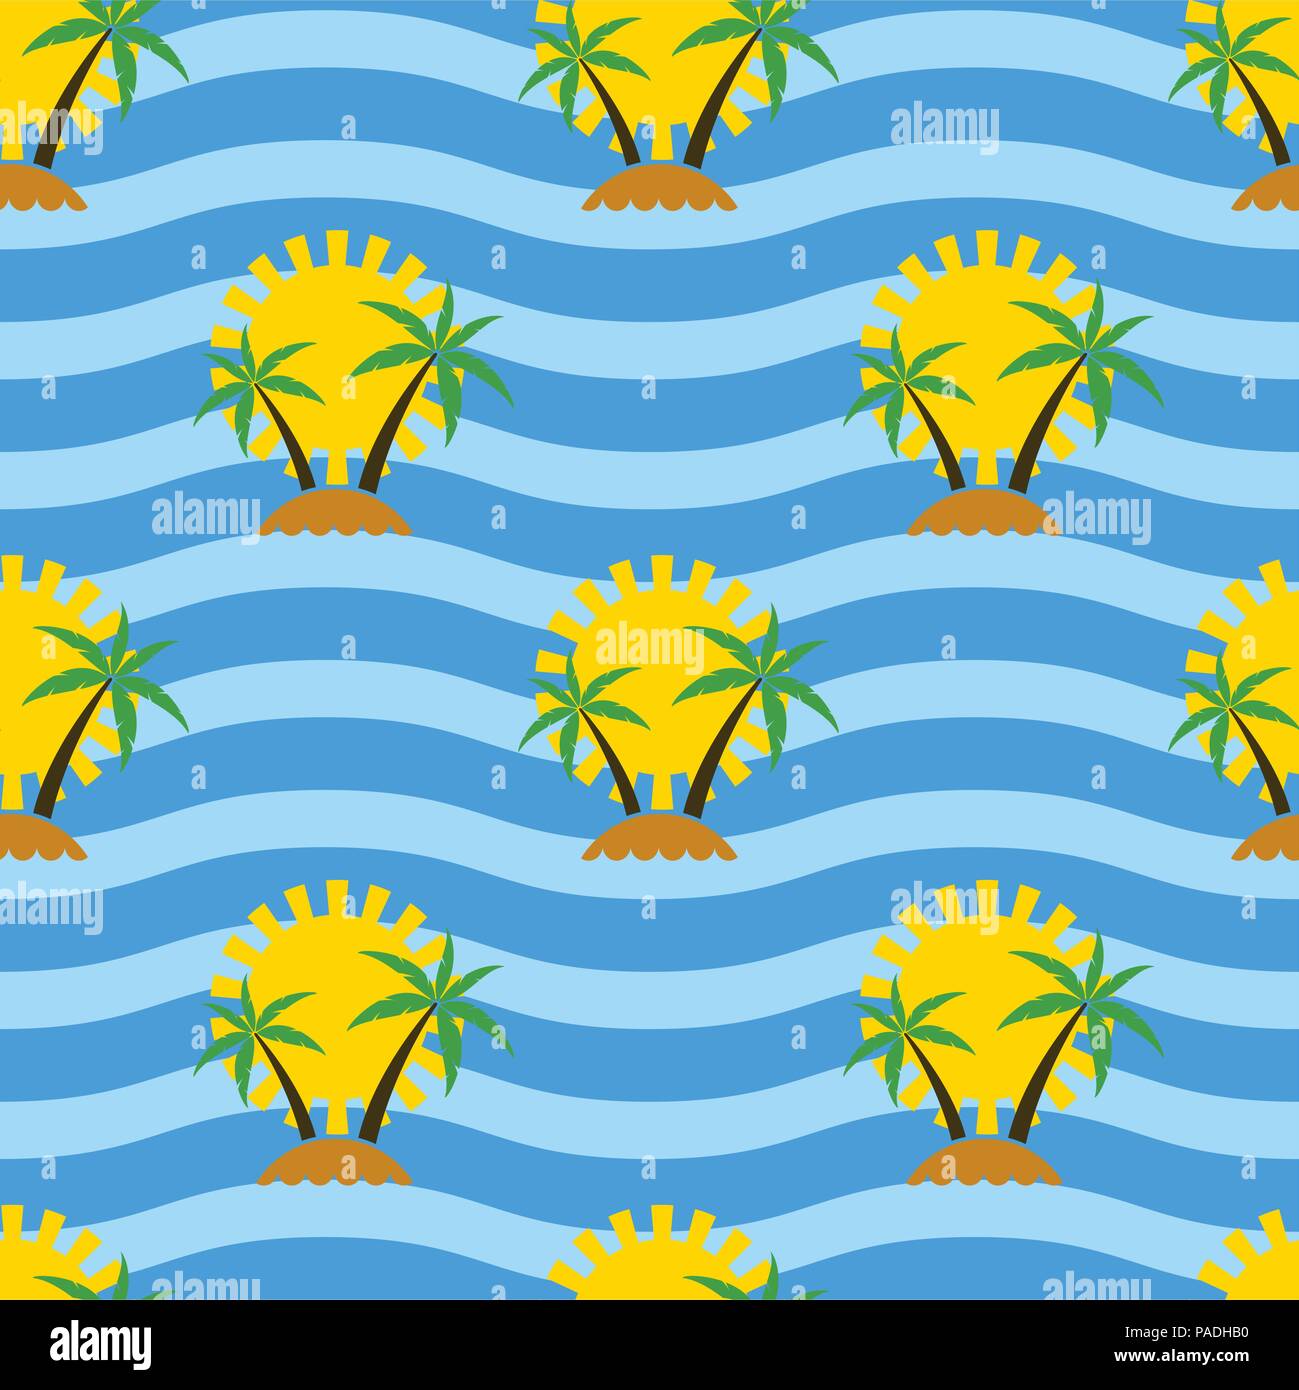 vector stylized seamless travel background with tropical palm trees, sun with rays, sand islands and blue sea waves Stock Vector